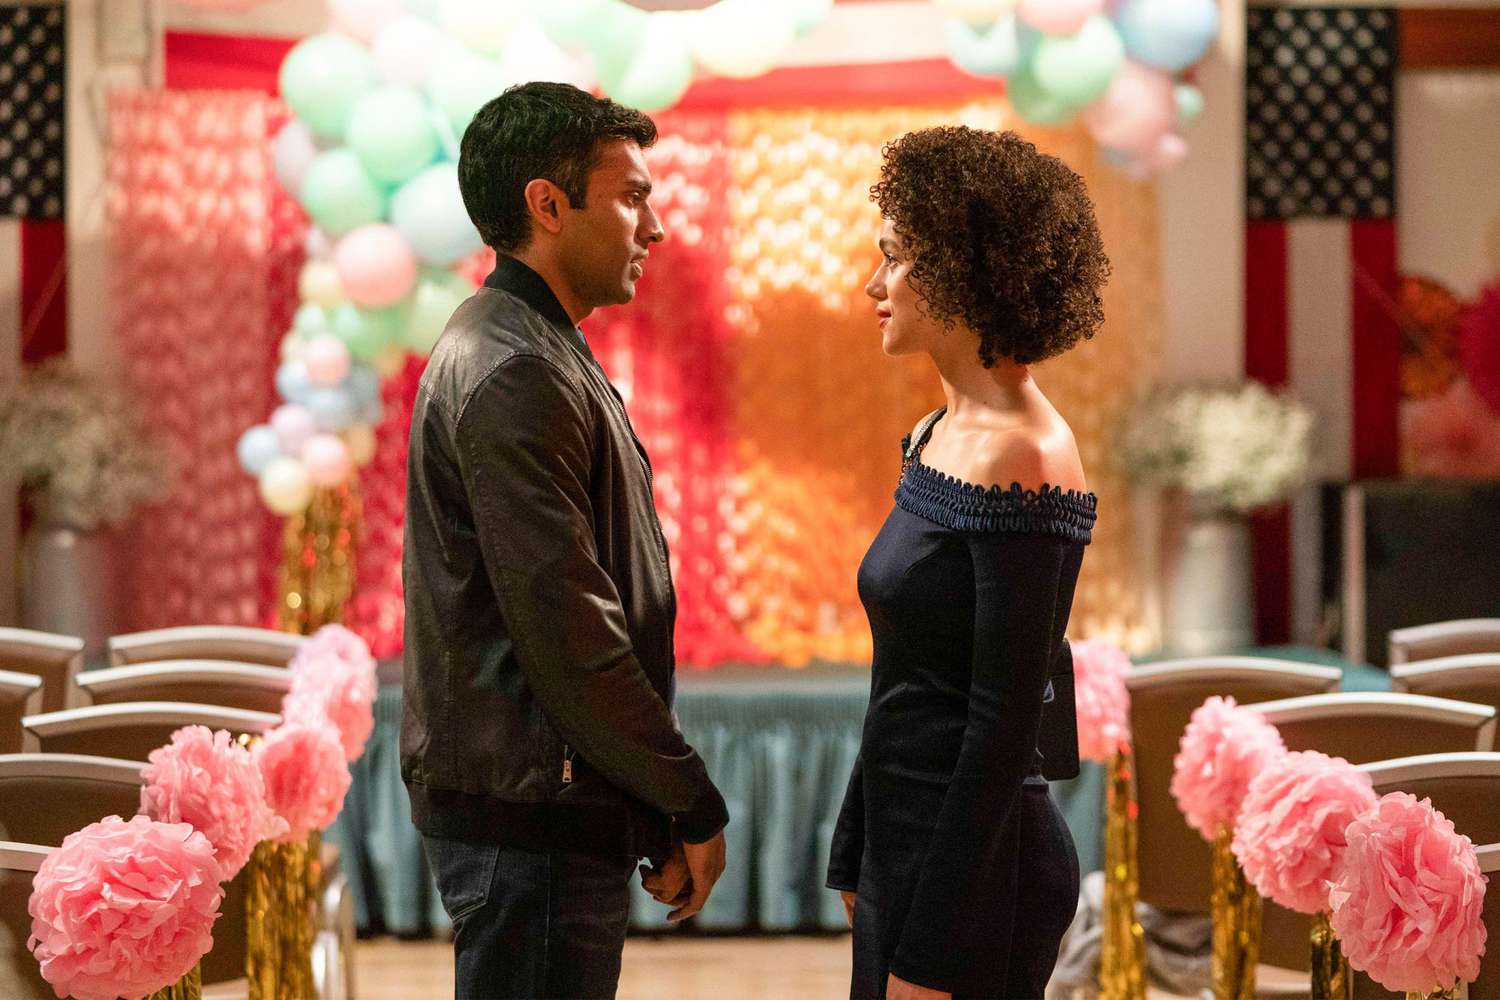 Four Weddings and A Funeral - "New Jersey" - Episode 110 -- A year after Maya and Ainsley's blowup, the fractured friend group hopes that a wedding may be the perfect occasion for a reunion. Kash (Nikesh Patel) and Maya (Nathalie Emmanuel), shown. (Photo by: Robert Viglasky/Hulu)